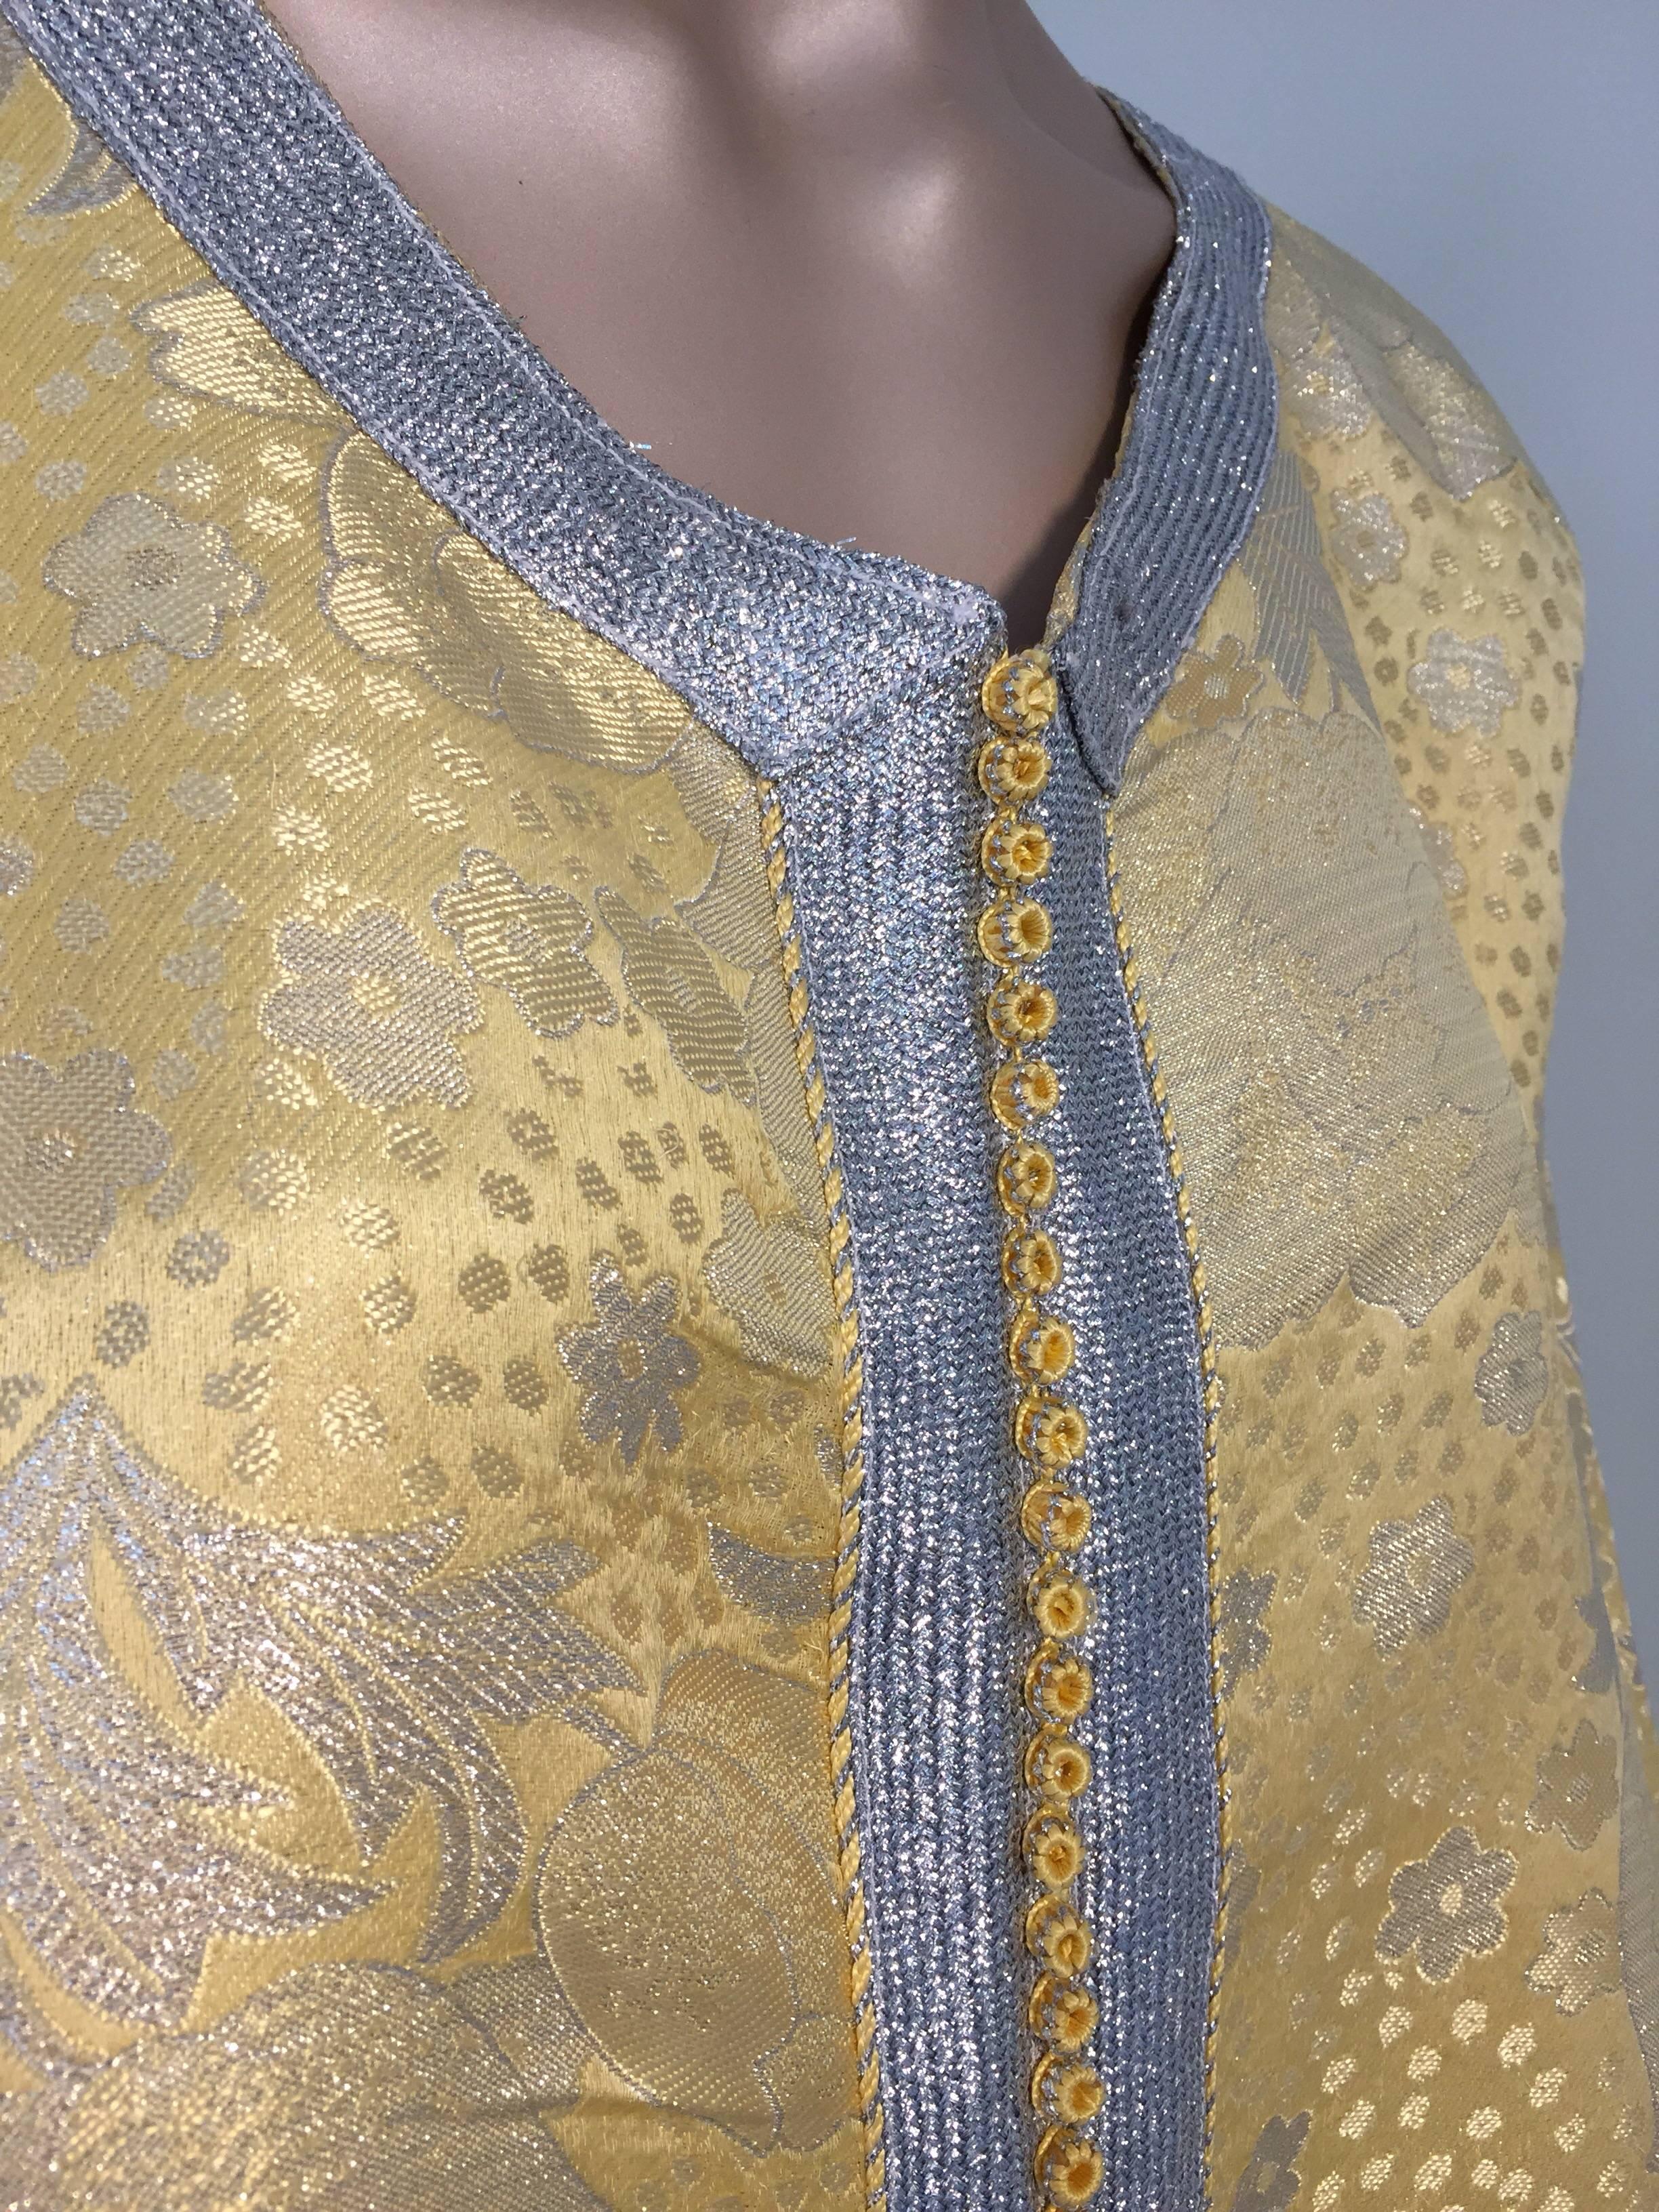 Moroccan Metallic Gold and Silver Brocade 1970s Maxi Dress Caftan, Evening Gown Kaftan For Sale